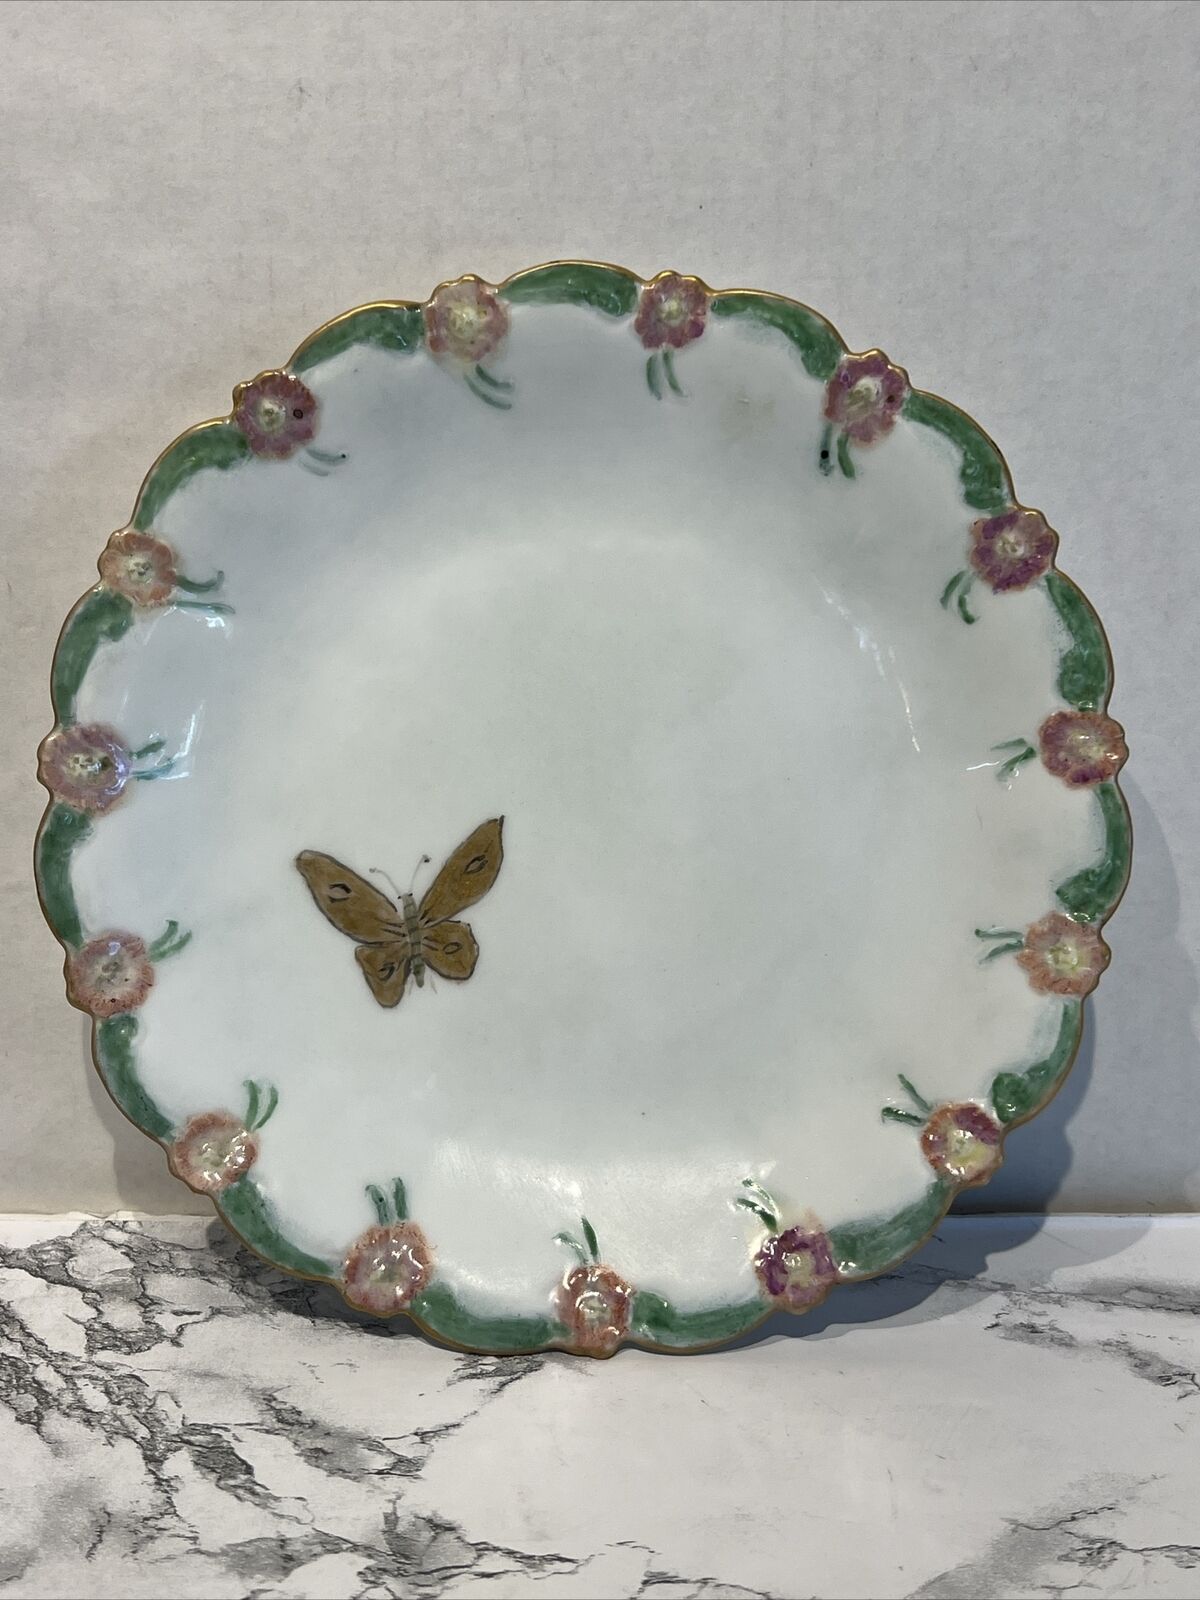 Vintage Limoges France Plate Butterfly Decor 8.5” Unique Hand painted Oddity